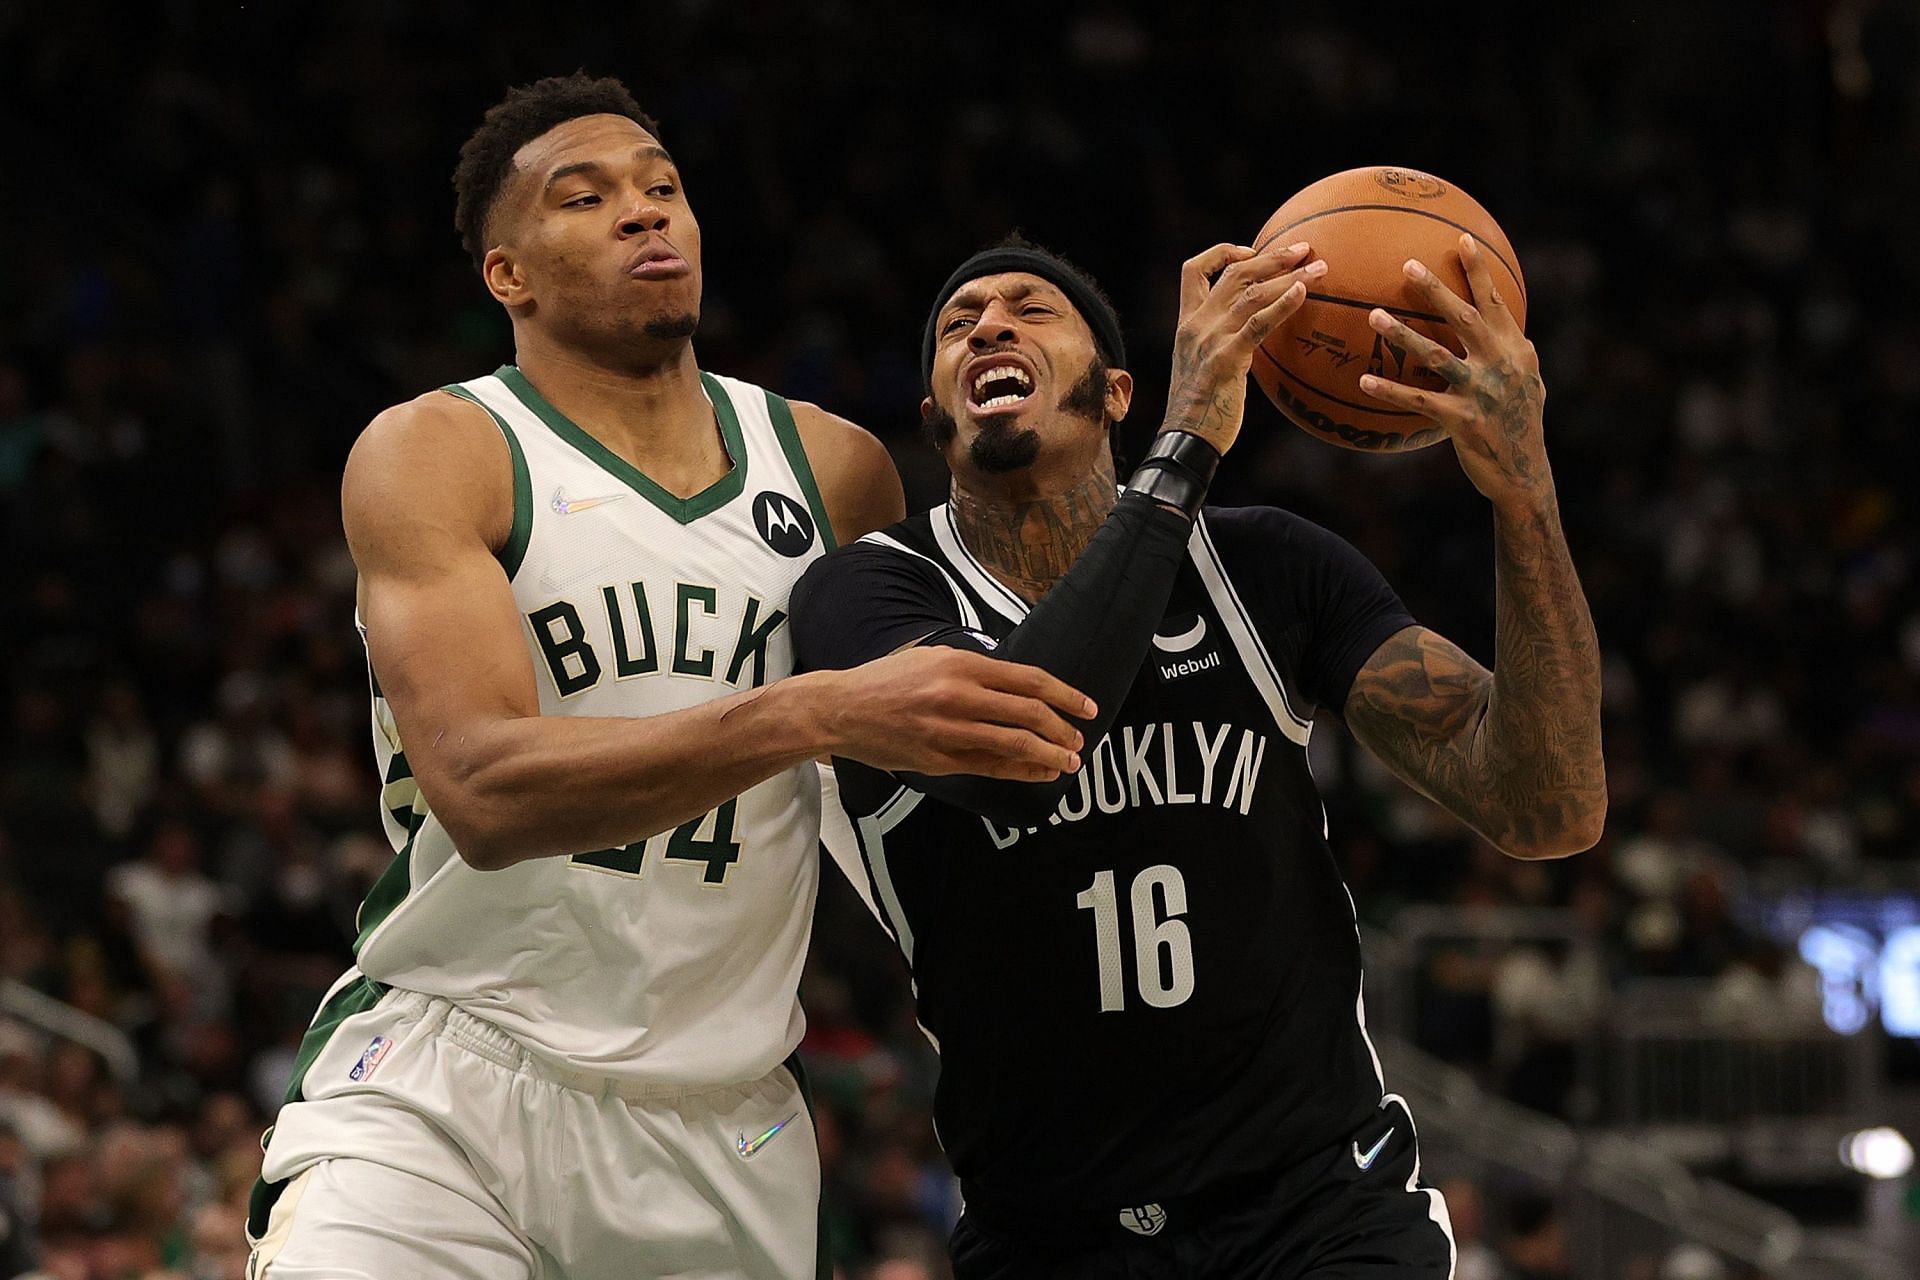 Giannis Antetokounmpo came up with a double-double as the Milwaukee Bucks bested the Brooklyn Nets on opening night